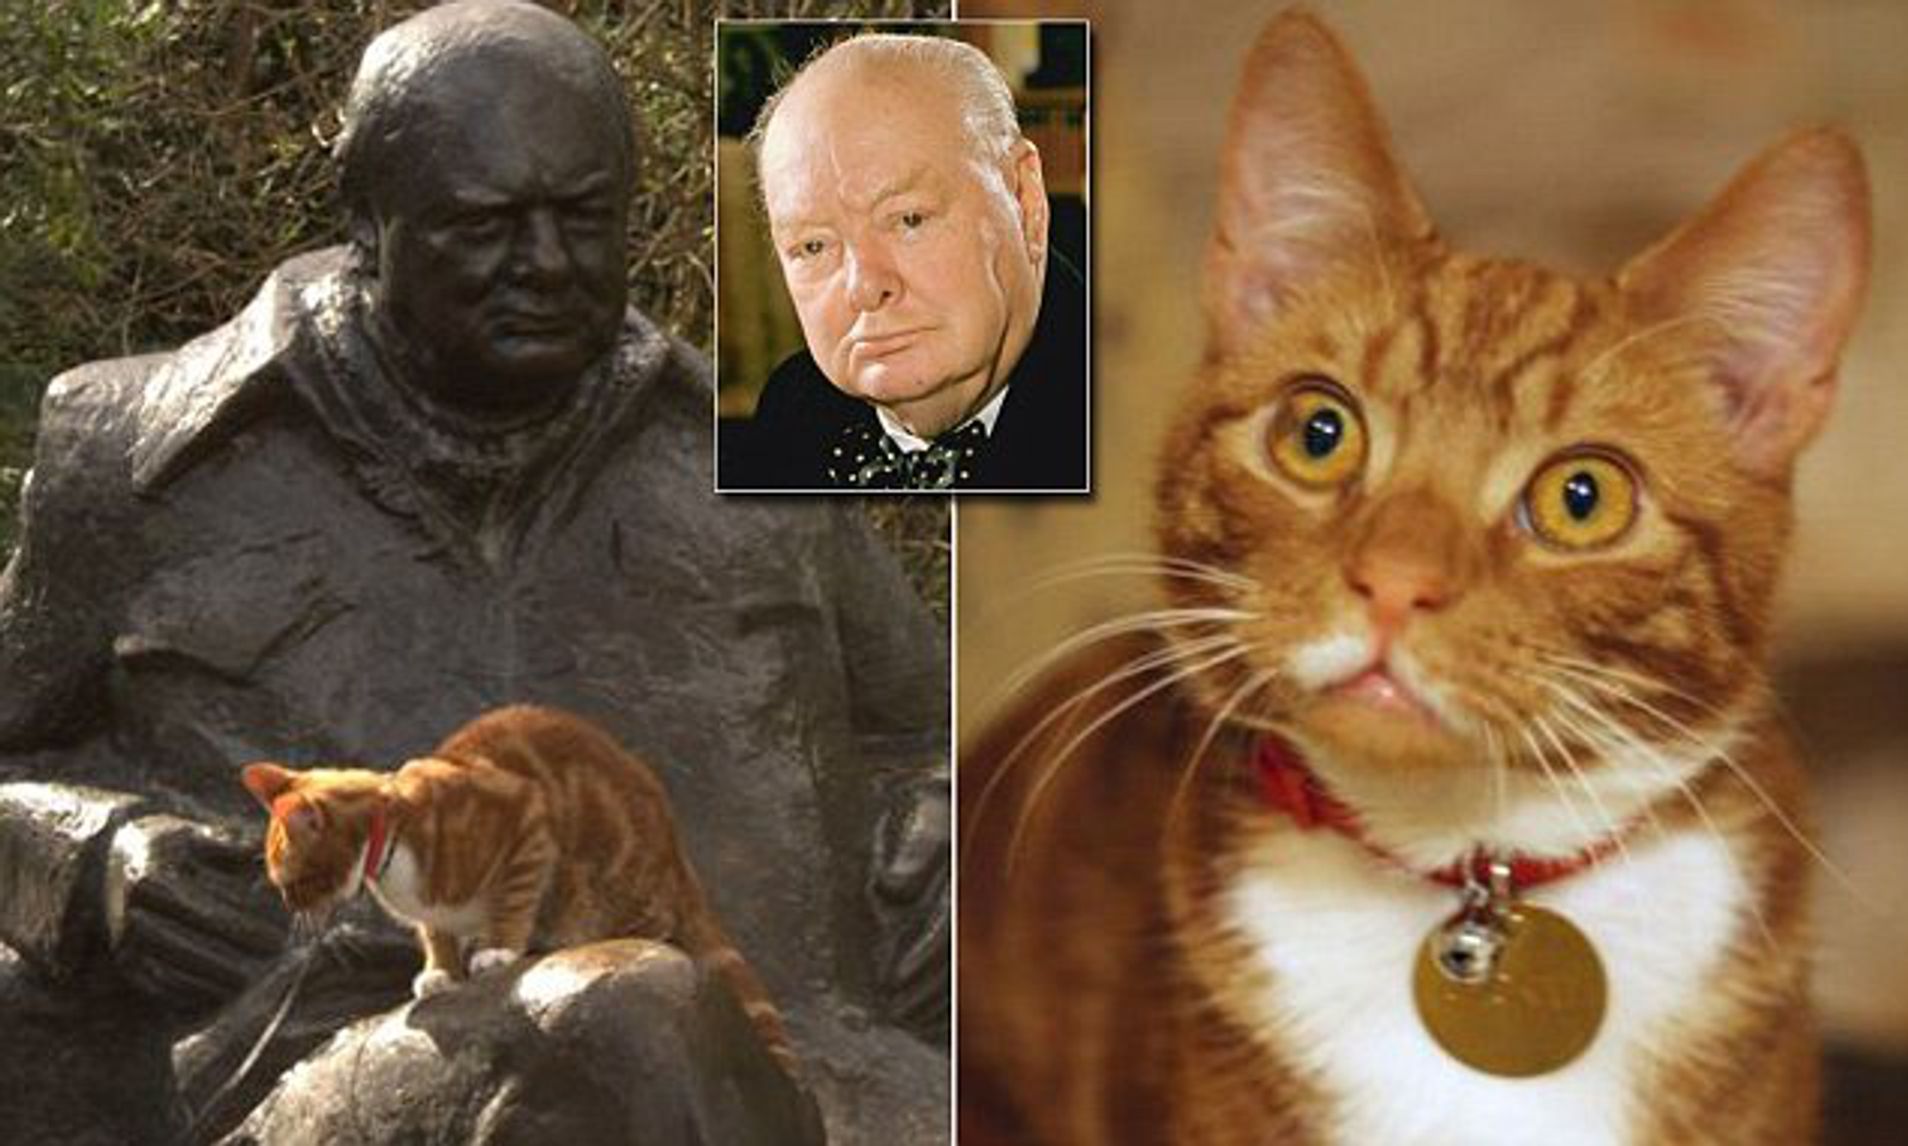 When Winston Churchill sold Chartwell, the family home, to the National Trust, he required that there always be a marmalade cat named Jock in "comfortable residence." The Trust honored that request. The current occupant is Jock VII, a six-month-old rescue